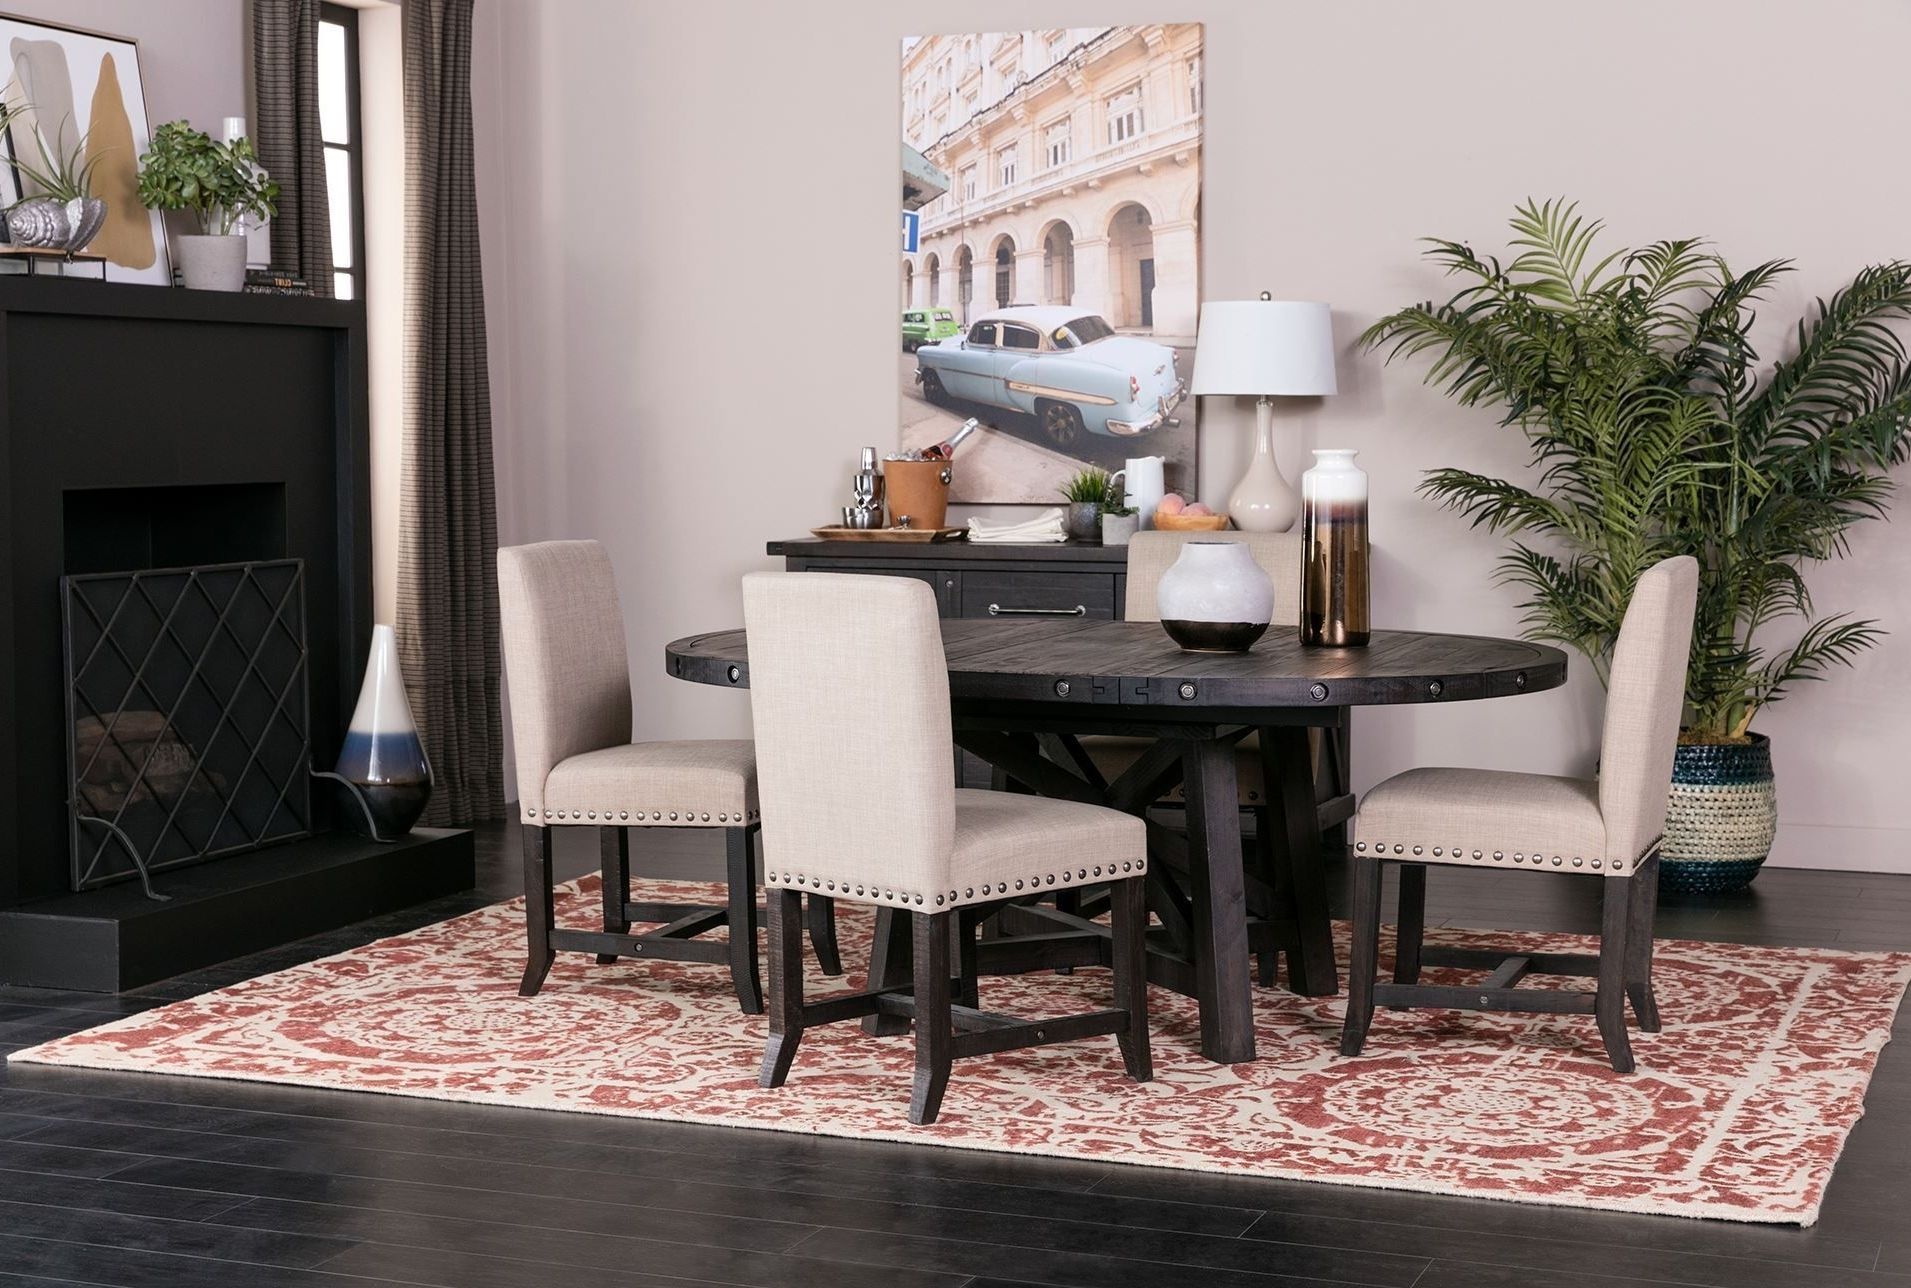 Round Dining Regarding Jaxon 5 Piece Round Dining Sets With Upholstered Chairs (View 4 of 25)